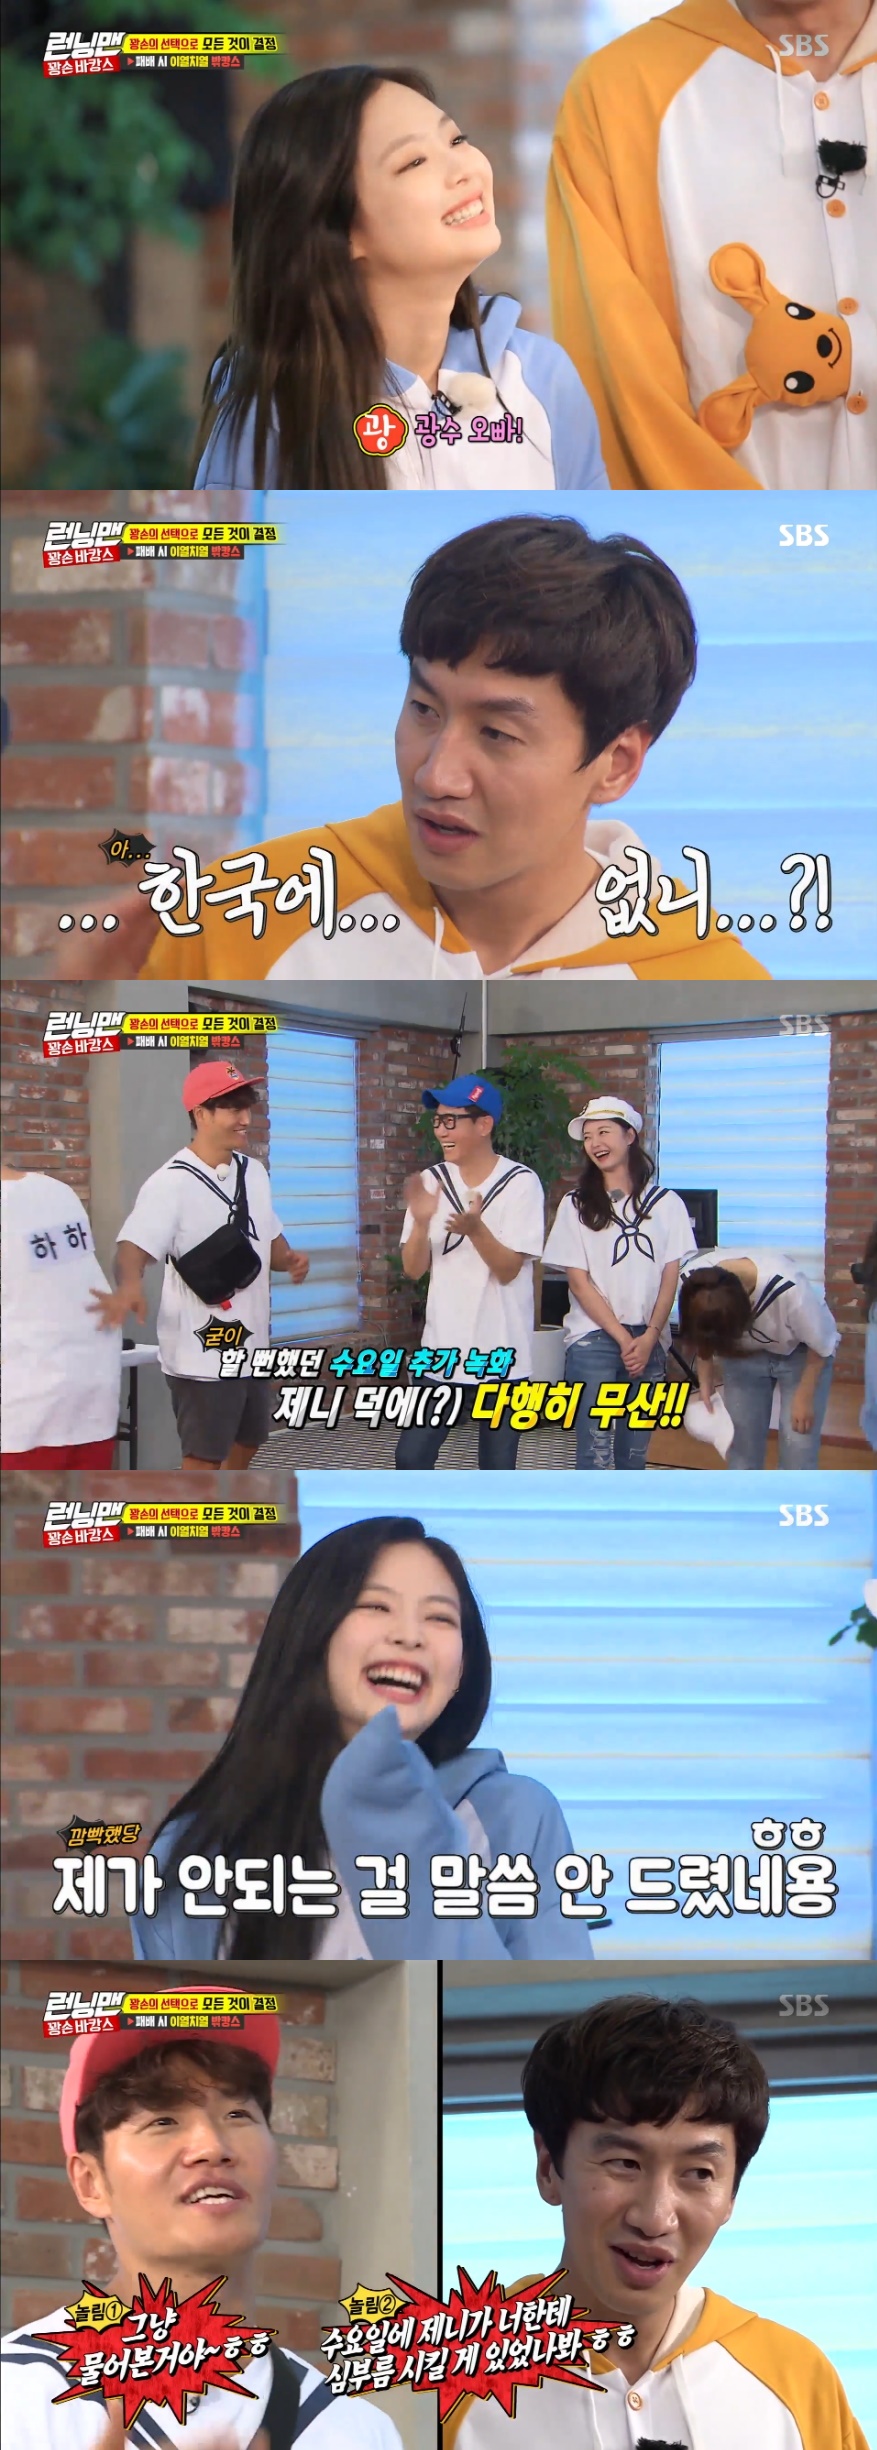 Group Black Pink member Jenny Kim showed off her entertainment feeling at the third SBS Running Man outing and captured members and viewers.Jenny Kim appeared on SBS Running Man on August 12 as a guest with actor Jin Ki-joo.On this day, the broadcast was featured in the Kangson Vacation feature, which is determined only by the choice of Kangson.Jenny Kims appearance on Running Man is the third.Earlier, he made his first appearance in December 2016 with Black Pink members JiSoo, Rose and Lisa, and made a terrestrial entertainment ceremony.It also appeared with JiSoo in Running Man which was broadcast on July 15th.Especially at the time of the second appearance, unlike the cute Stephanie Herseth Sandlin, she was exhausted in 30 seconds of race, and she was crying from the beginning of the horror experience mission. She wrote the stigma of crying, stool hand, Stephanie Herseth Sandlin and the most luckless guest.Jenny Kim, who re-appeared in Running Man at a high speed within a month, caught the eye with a different appearance from the last broadcast.In the early days of the show, he laughed with a still-crazy face, and after losing the scissors rock showdown with Jin Ki-joo, he picked up his animal pajamas when he chose his team uniform.Jenny Kim, who had never thought she was a bang-on before appearing in Running Man, laughed at the successive banging of I am starting to feel a little confident now.Jenny Kims bad luck didnt stop here: not a decent T-shirt, but a perplexed one in a uniquely designed T-shirt worn with Lee Kwangsoo.It seemed to be humiliated by such a series of shits, but the situation reversed in the archery match. The archery is good.Lee Kwangsoo said, I have not said anything so far, and still can not get rid of the suspicion toward Jenny Kim.Jenny Kim scored eight points in her first arrow; unexpectedly high scores were cheered by members of the same team, including Yoo Jae-Suk, Lee Kwangsoo, Song Ji-hyo and Yang Se-chan.Even the second arrow hit nine points; opponents runner Kim Jong-guk scored nine points on his first foot, but lost to Jenny Kim with four points on his second arrow.The witty Three-Line Poem also showed off once again.Lee Kwangsoo, who is considered to be the official villain character of Running Man, also laughed and laughed.Earlier, Jenny Kim made a Top Model on the Three-Line Poem mission at the time of her second Running Man appearance, and a Top Model on Three-Line Poem with partner name Lee Kwangsoo.At the time, Jenny Kim said, I think its time for Chairman Yang Hyun-seok to give me permission. How about a cup of water (drink) with my brother Kwangsoo?He pushed Lee Kwangsoo with a charming expression and voice and gathered topics.Jenny Kim, who once again said she would play Three-Line Poem with Lee Kwangsoo, said, This is what happened. Kwangsoo. How about Wednesday?I asked Lee Kwangsoo, I am totally free on Wednesday, and Yoo Jae-Suk shouted, No, I record it on Wednesday.hwang hye-jin